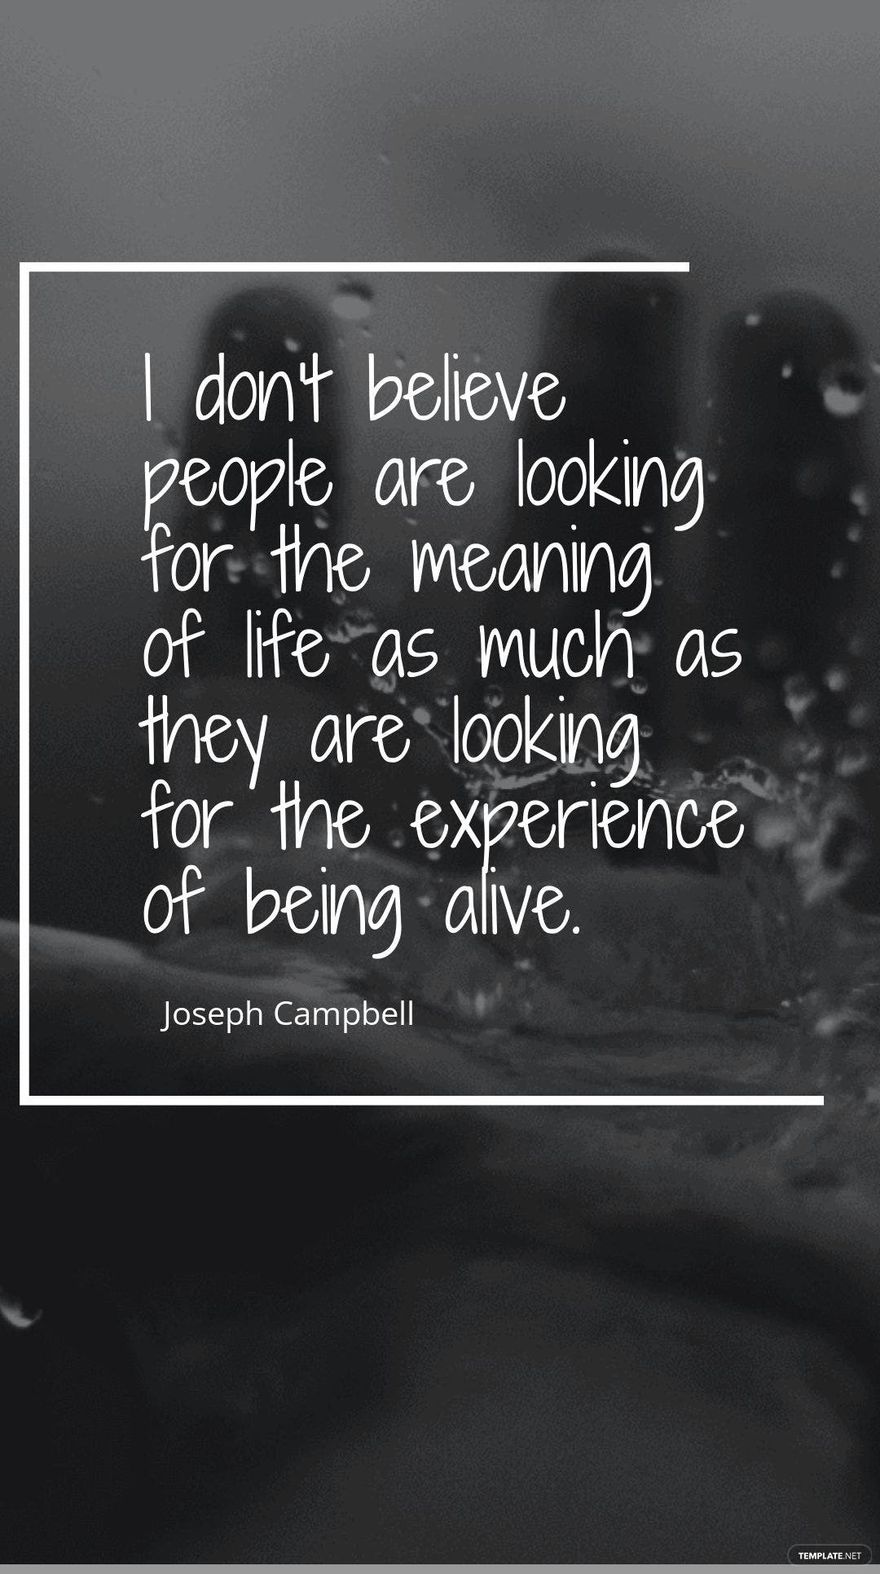 Joseph Campbell - I don't believe people are looking for the meaning of life as much as they are looking for the experience of being alive. Template